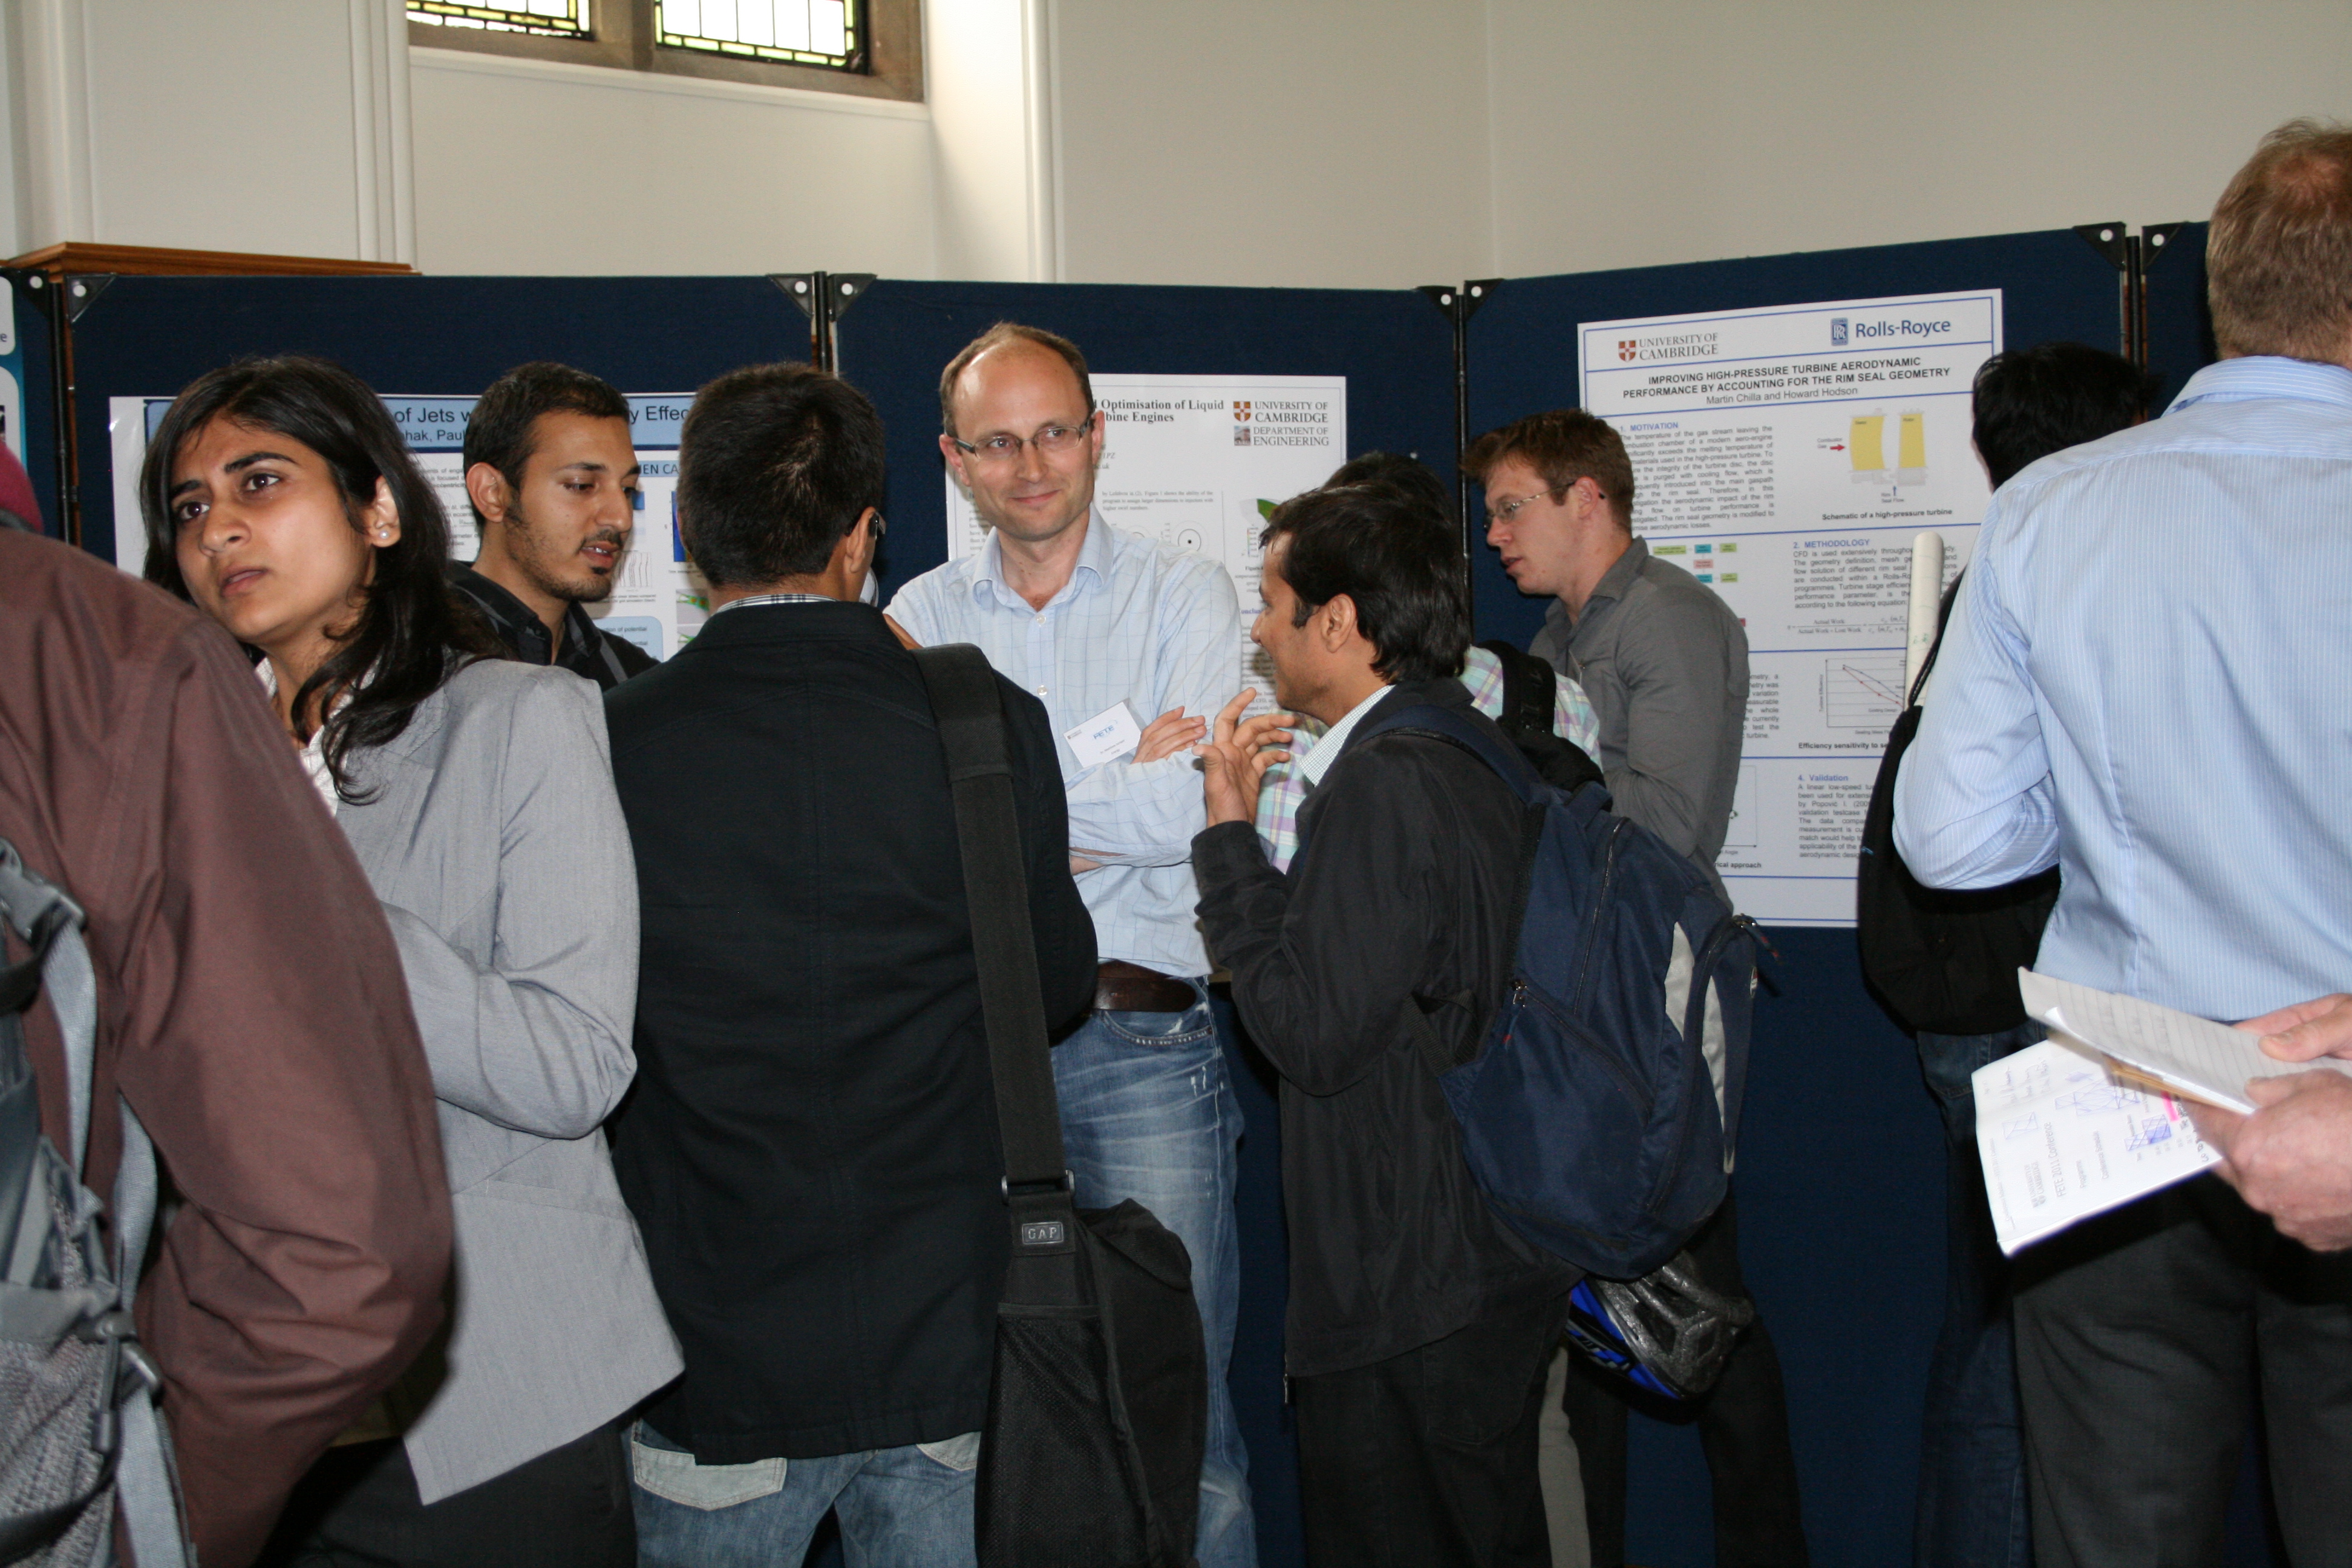 Posters session